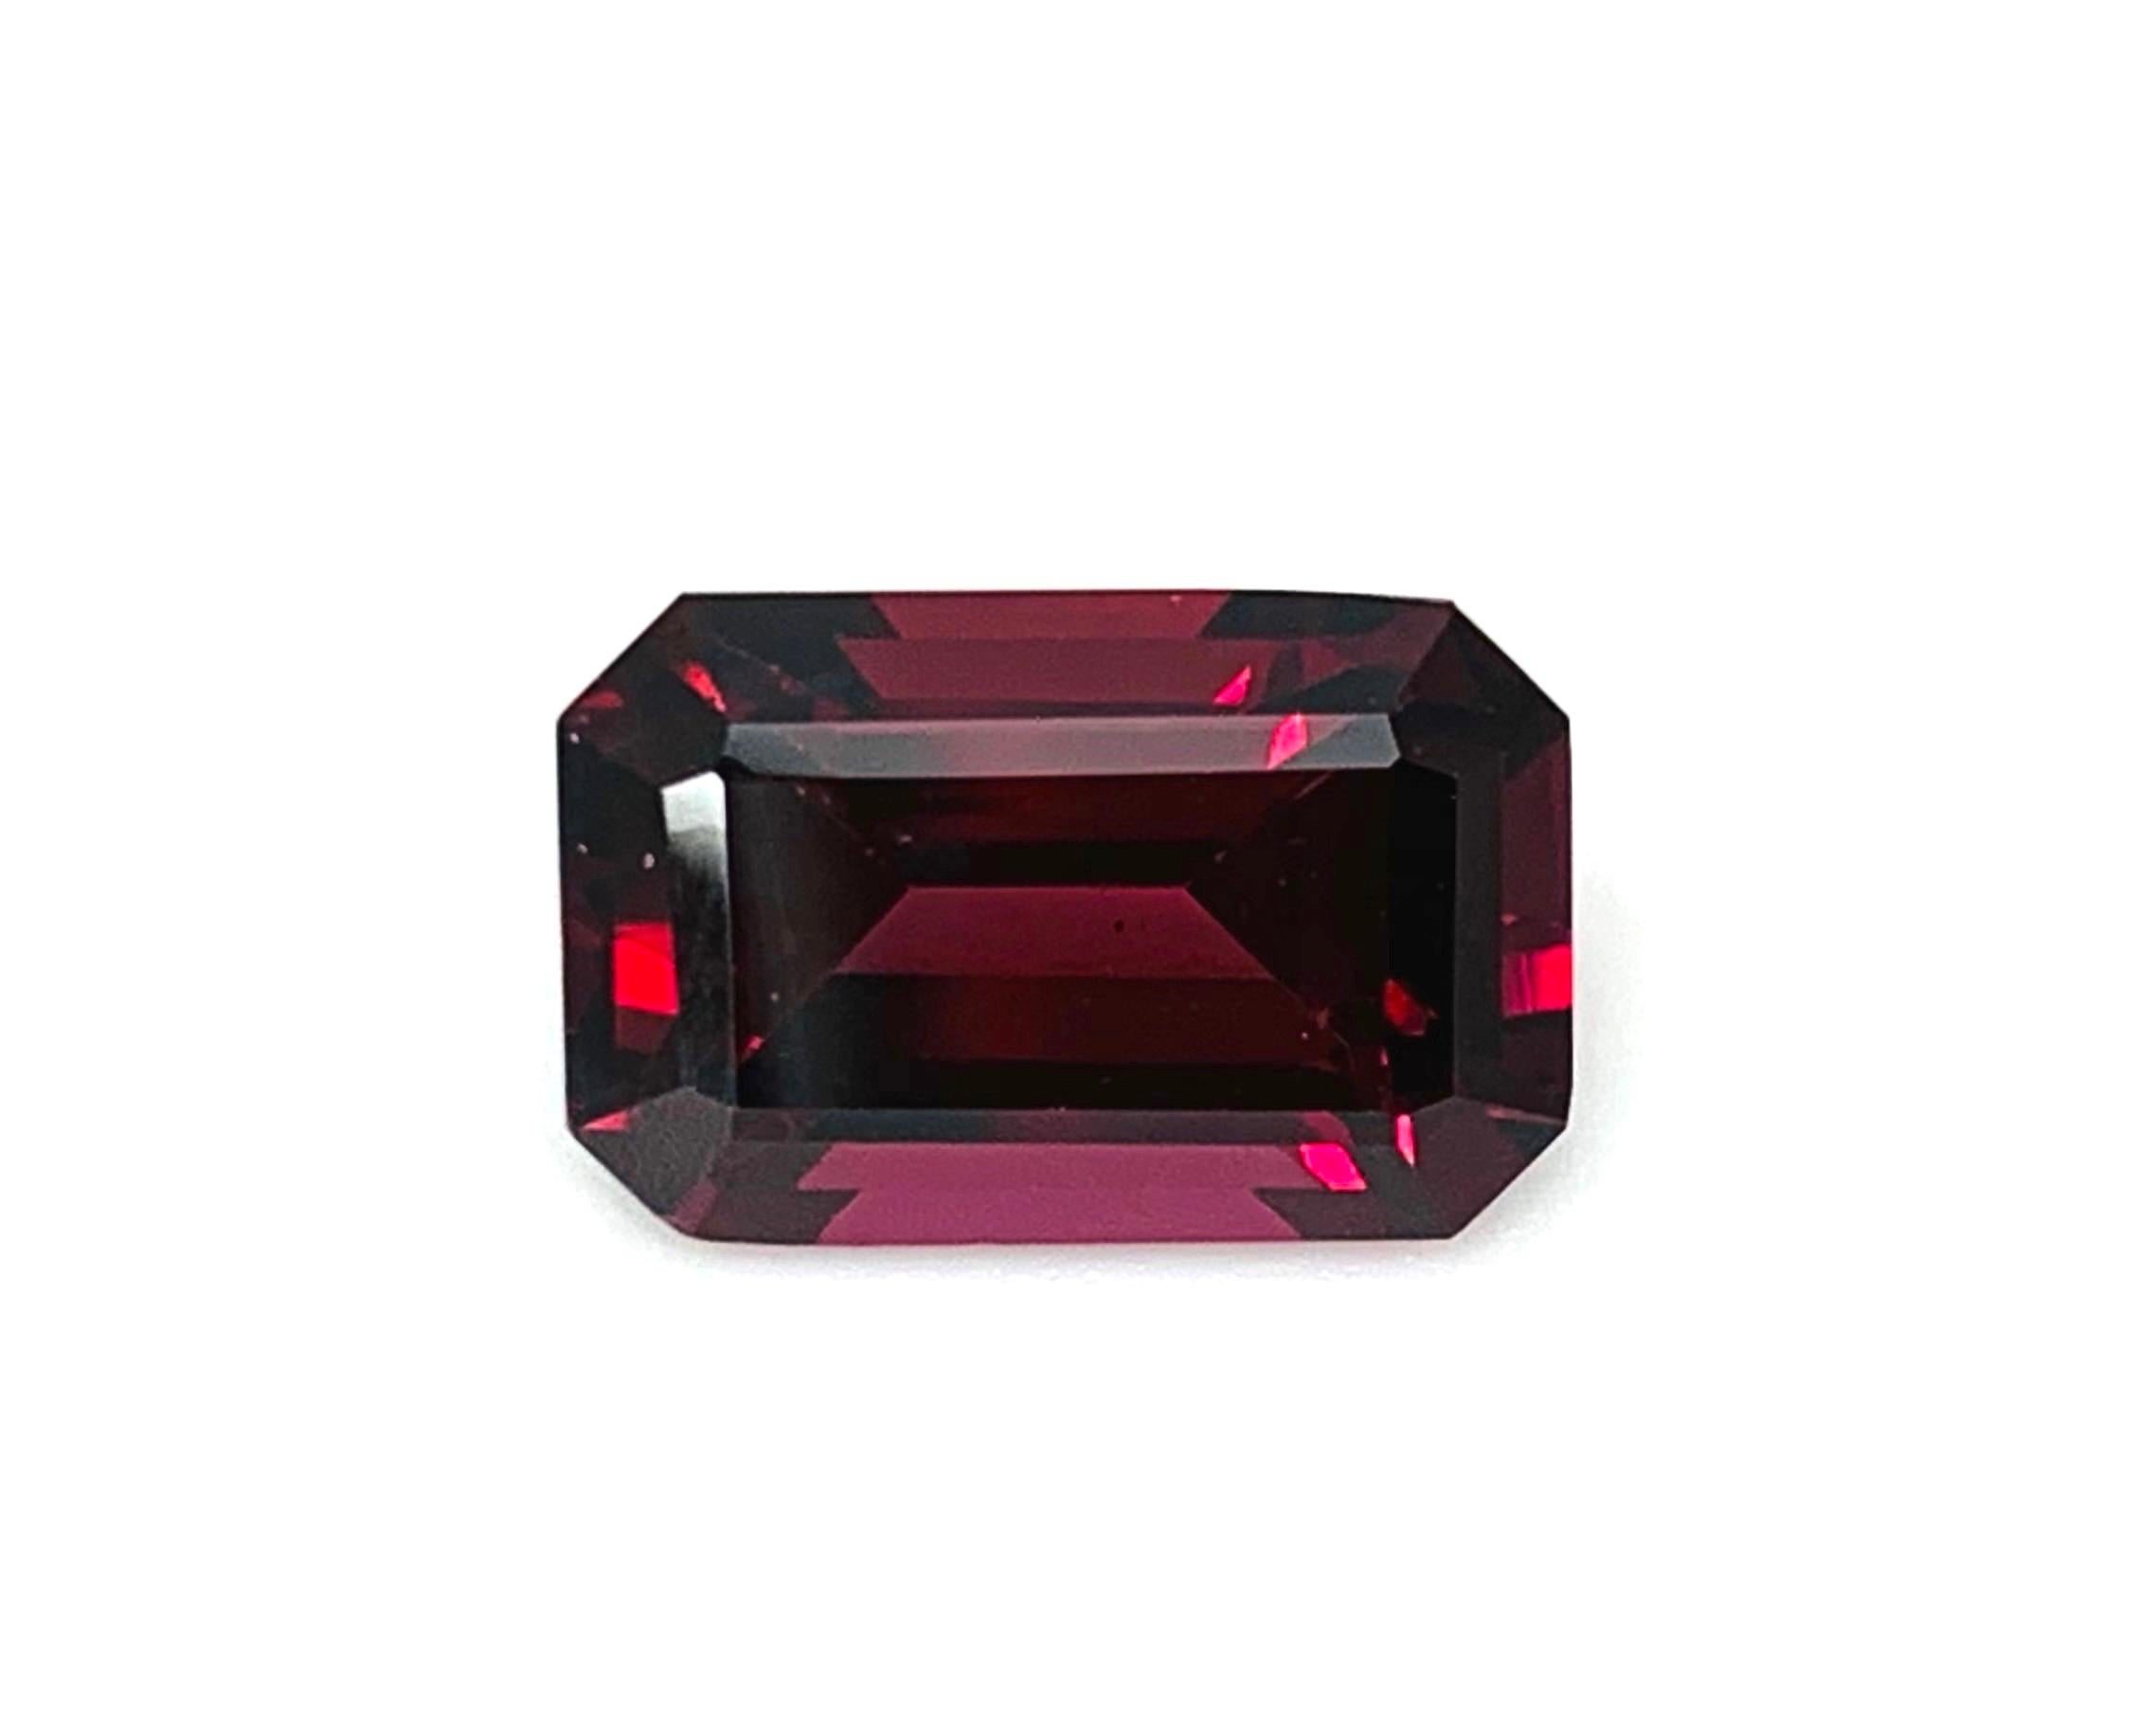 This gorgeous ruby red pyrope rhodolite garnet is stunning! It is an exceptionally bright and lively gem with a rich, slightly pinkish red color and excellent clarity. Measuring 12.46 x 8.27 x 6.13 millimeters, this pyrope garnet is extremely well